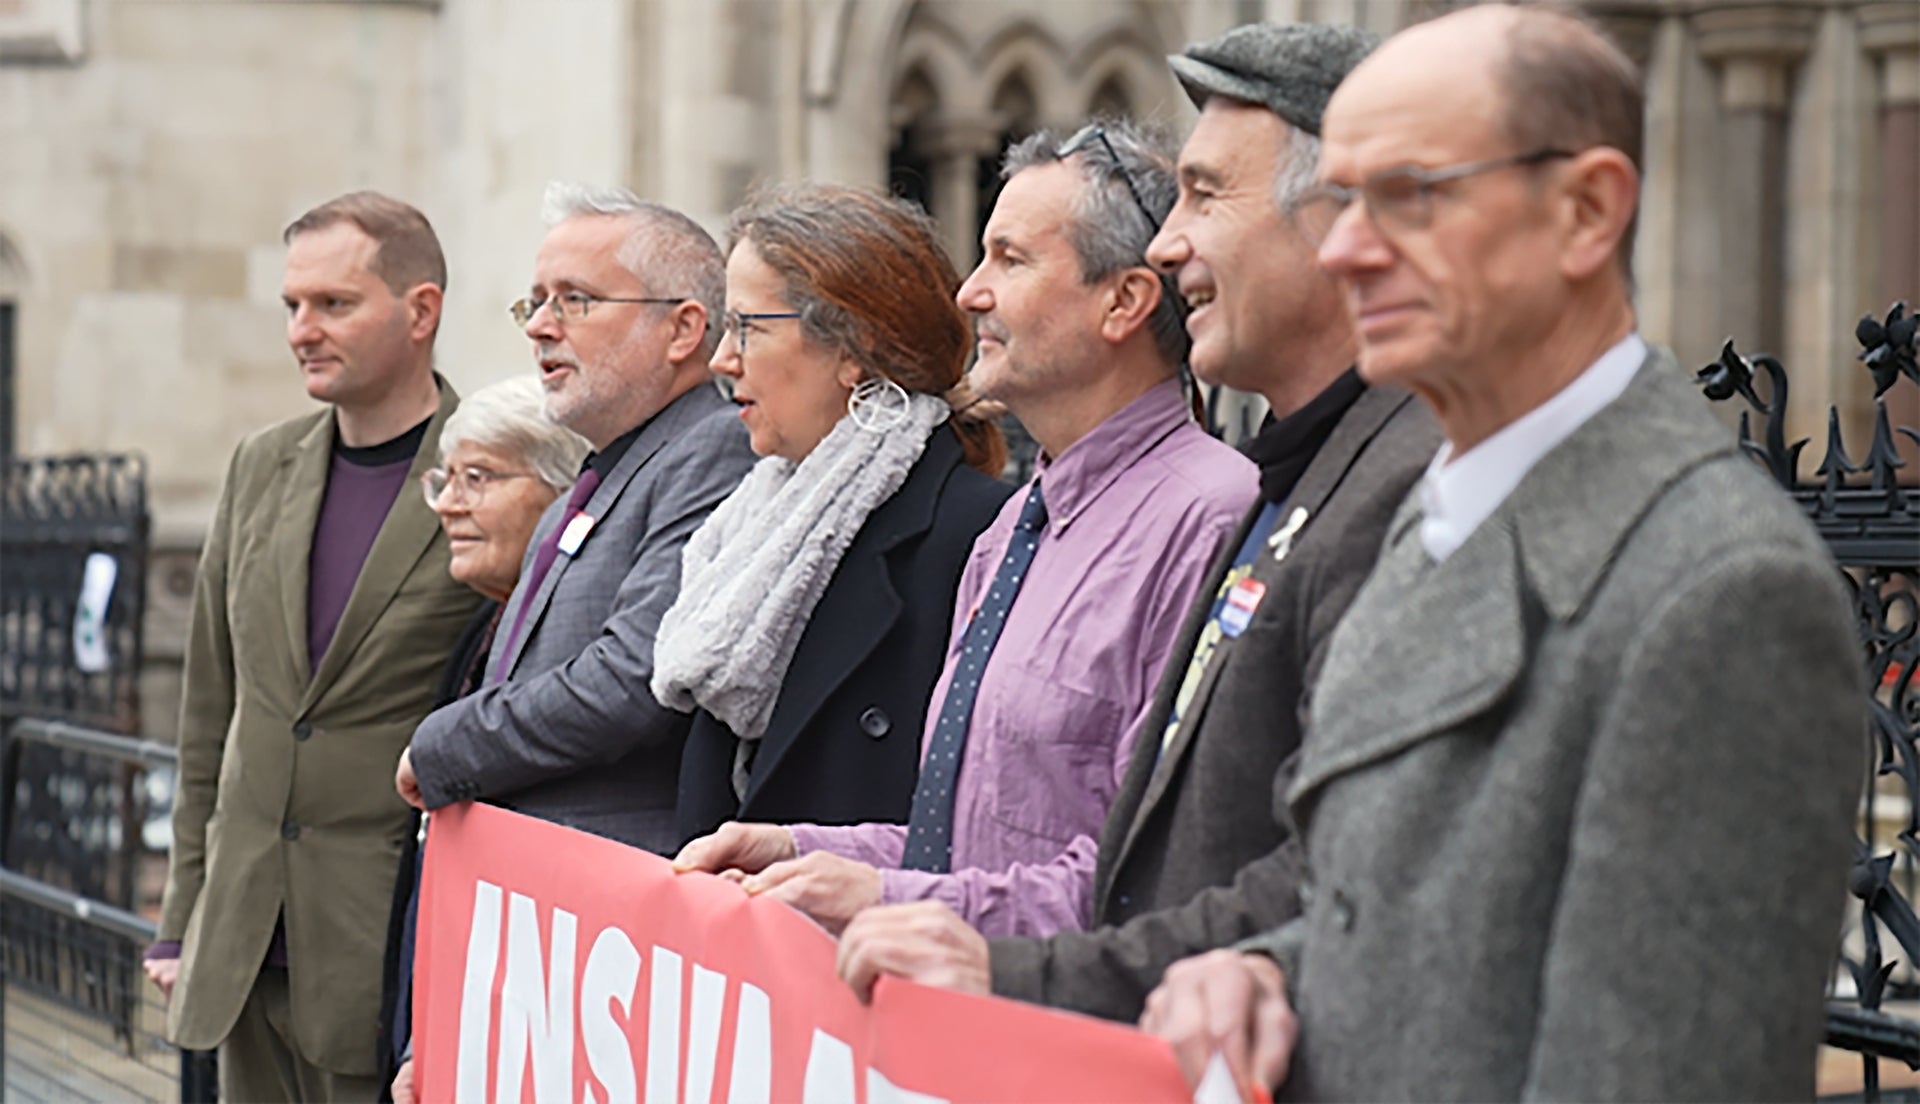 Members of Insulate Britain outside the High Court in London (Elspeth Keep/PA)